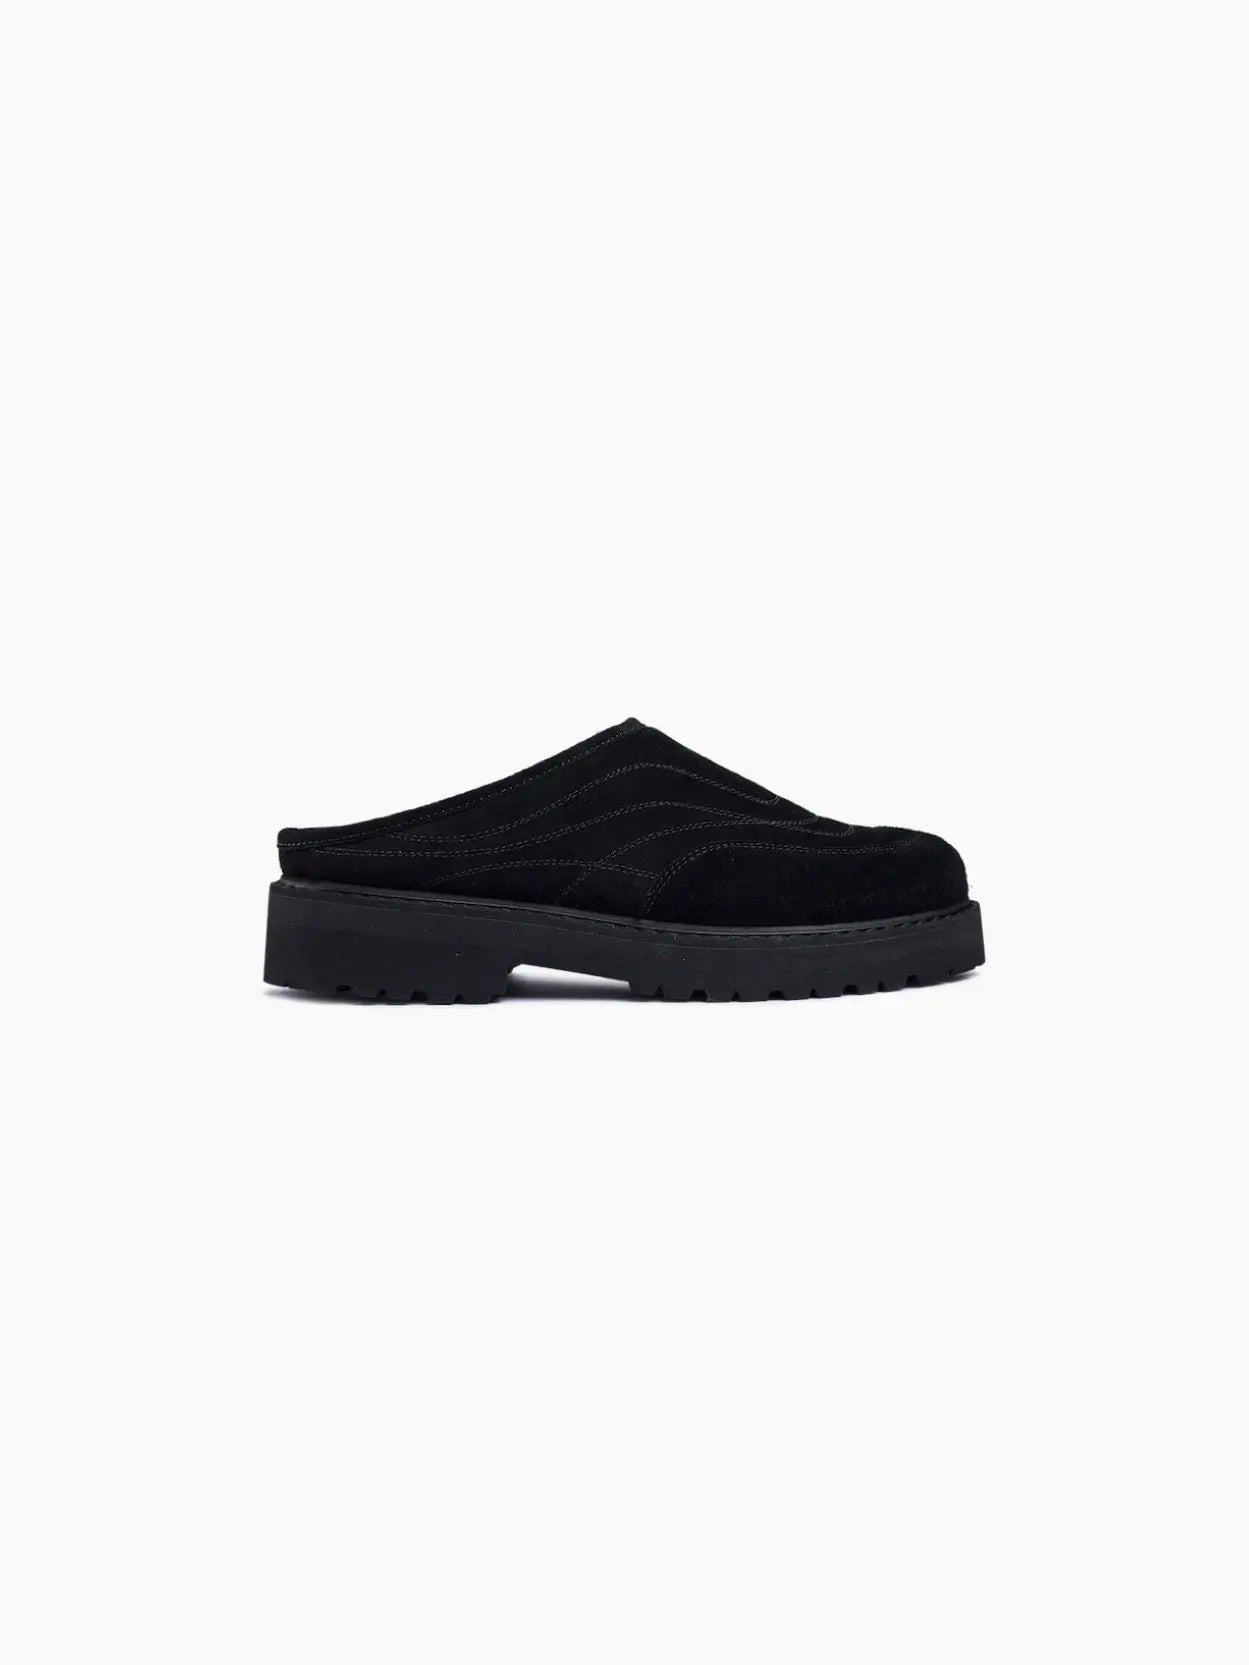 A single Maggiore Black Suede slip-on clog by Diemme with visible stitching and a thick black sole, viewed from the side against a white background, reminiscent of the chic style found in a Barcelona store.